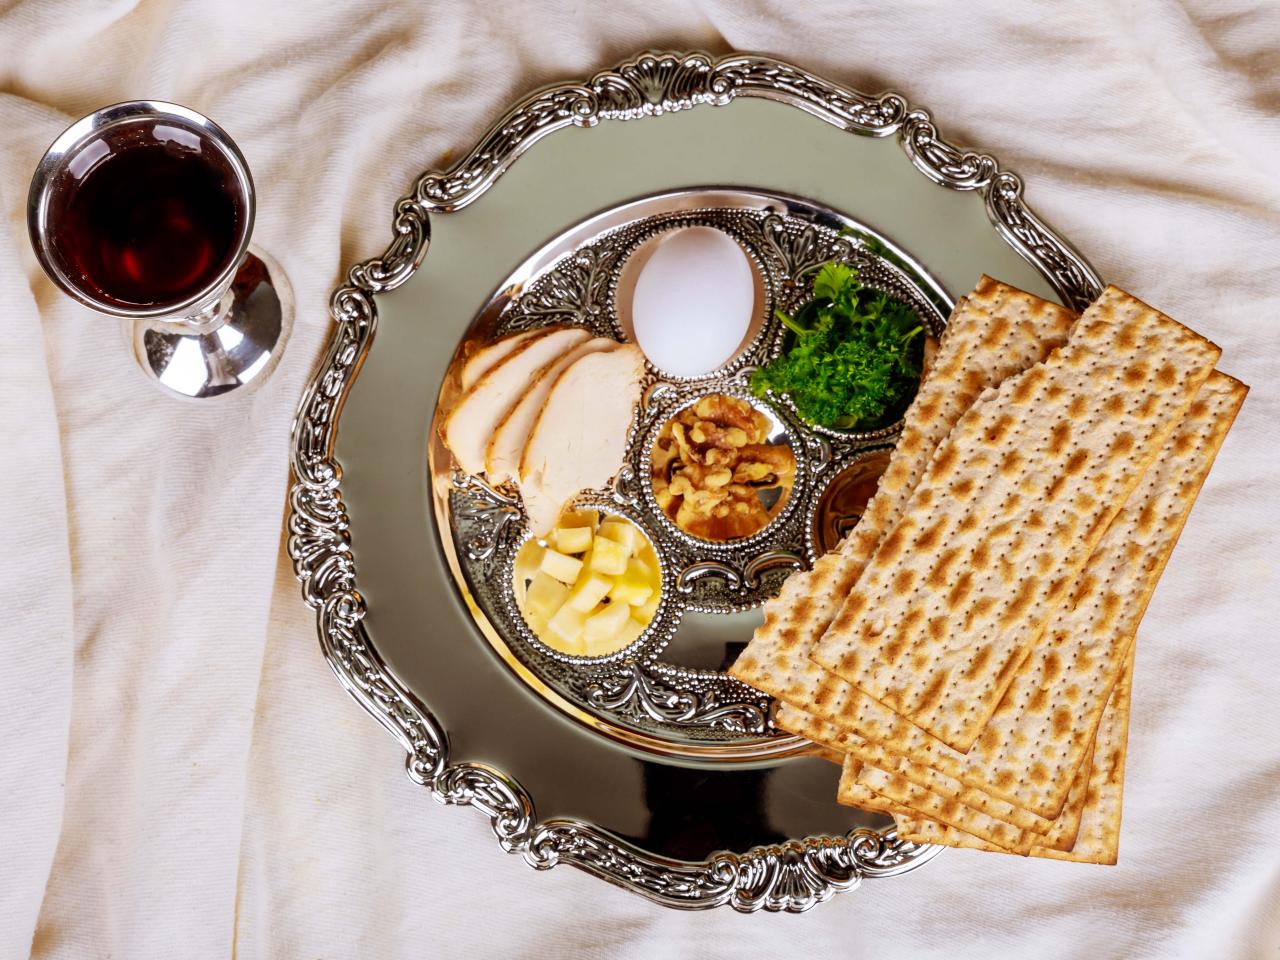 The BEST Pesach packed lunch ideas!